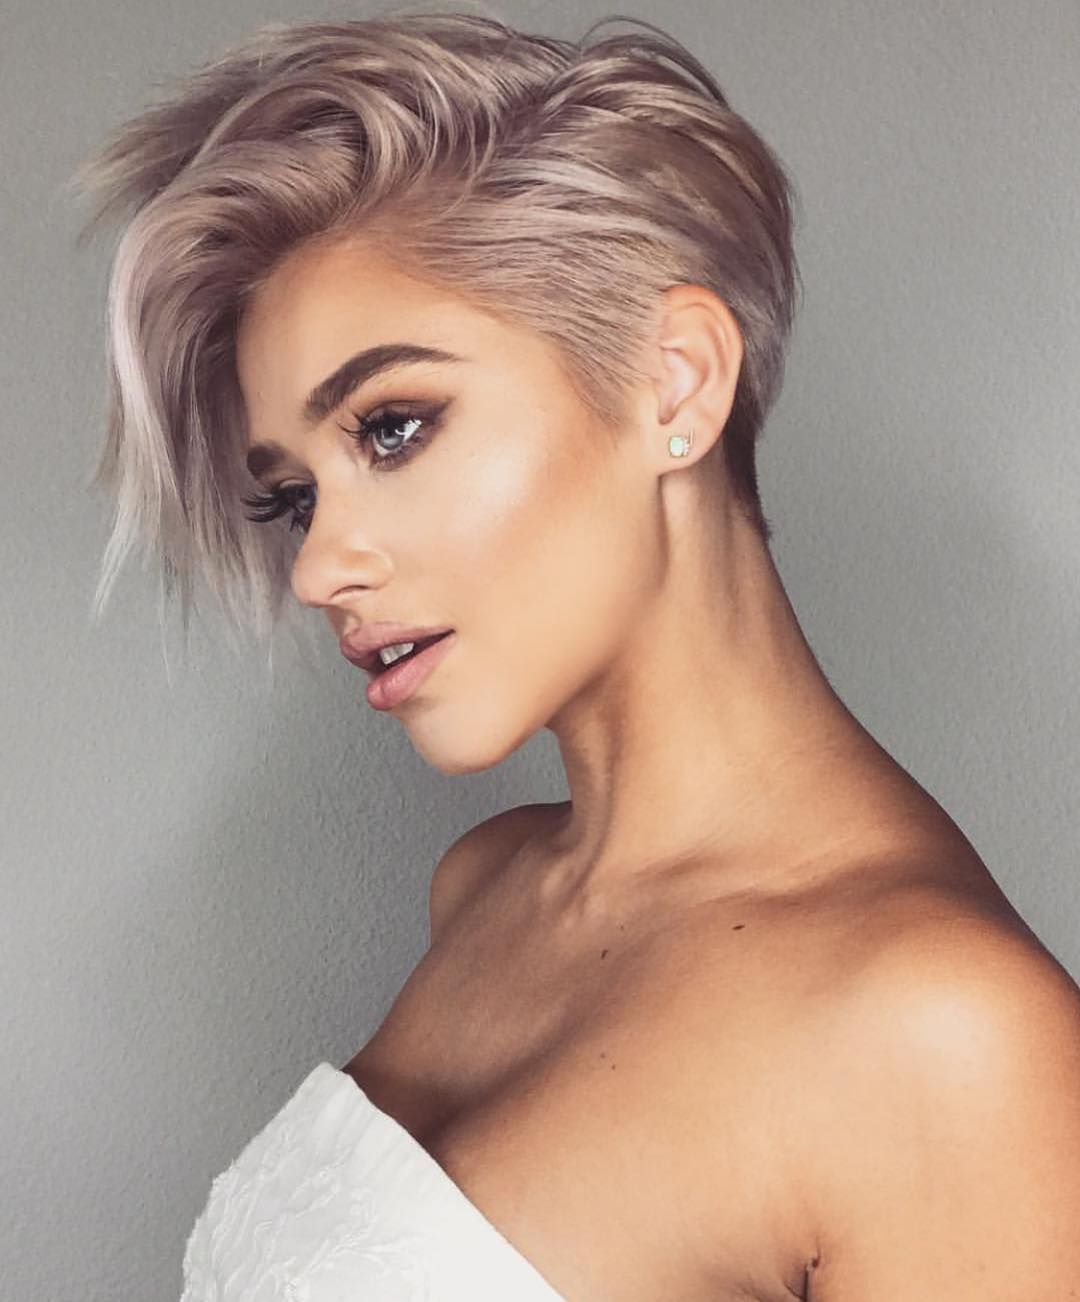 24 Short hair cuts for woman 2020 for Oval Face